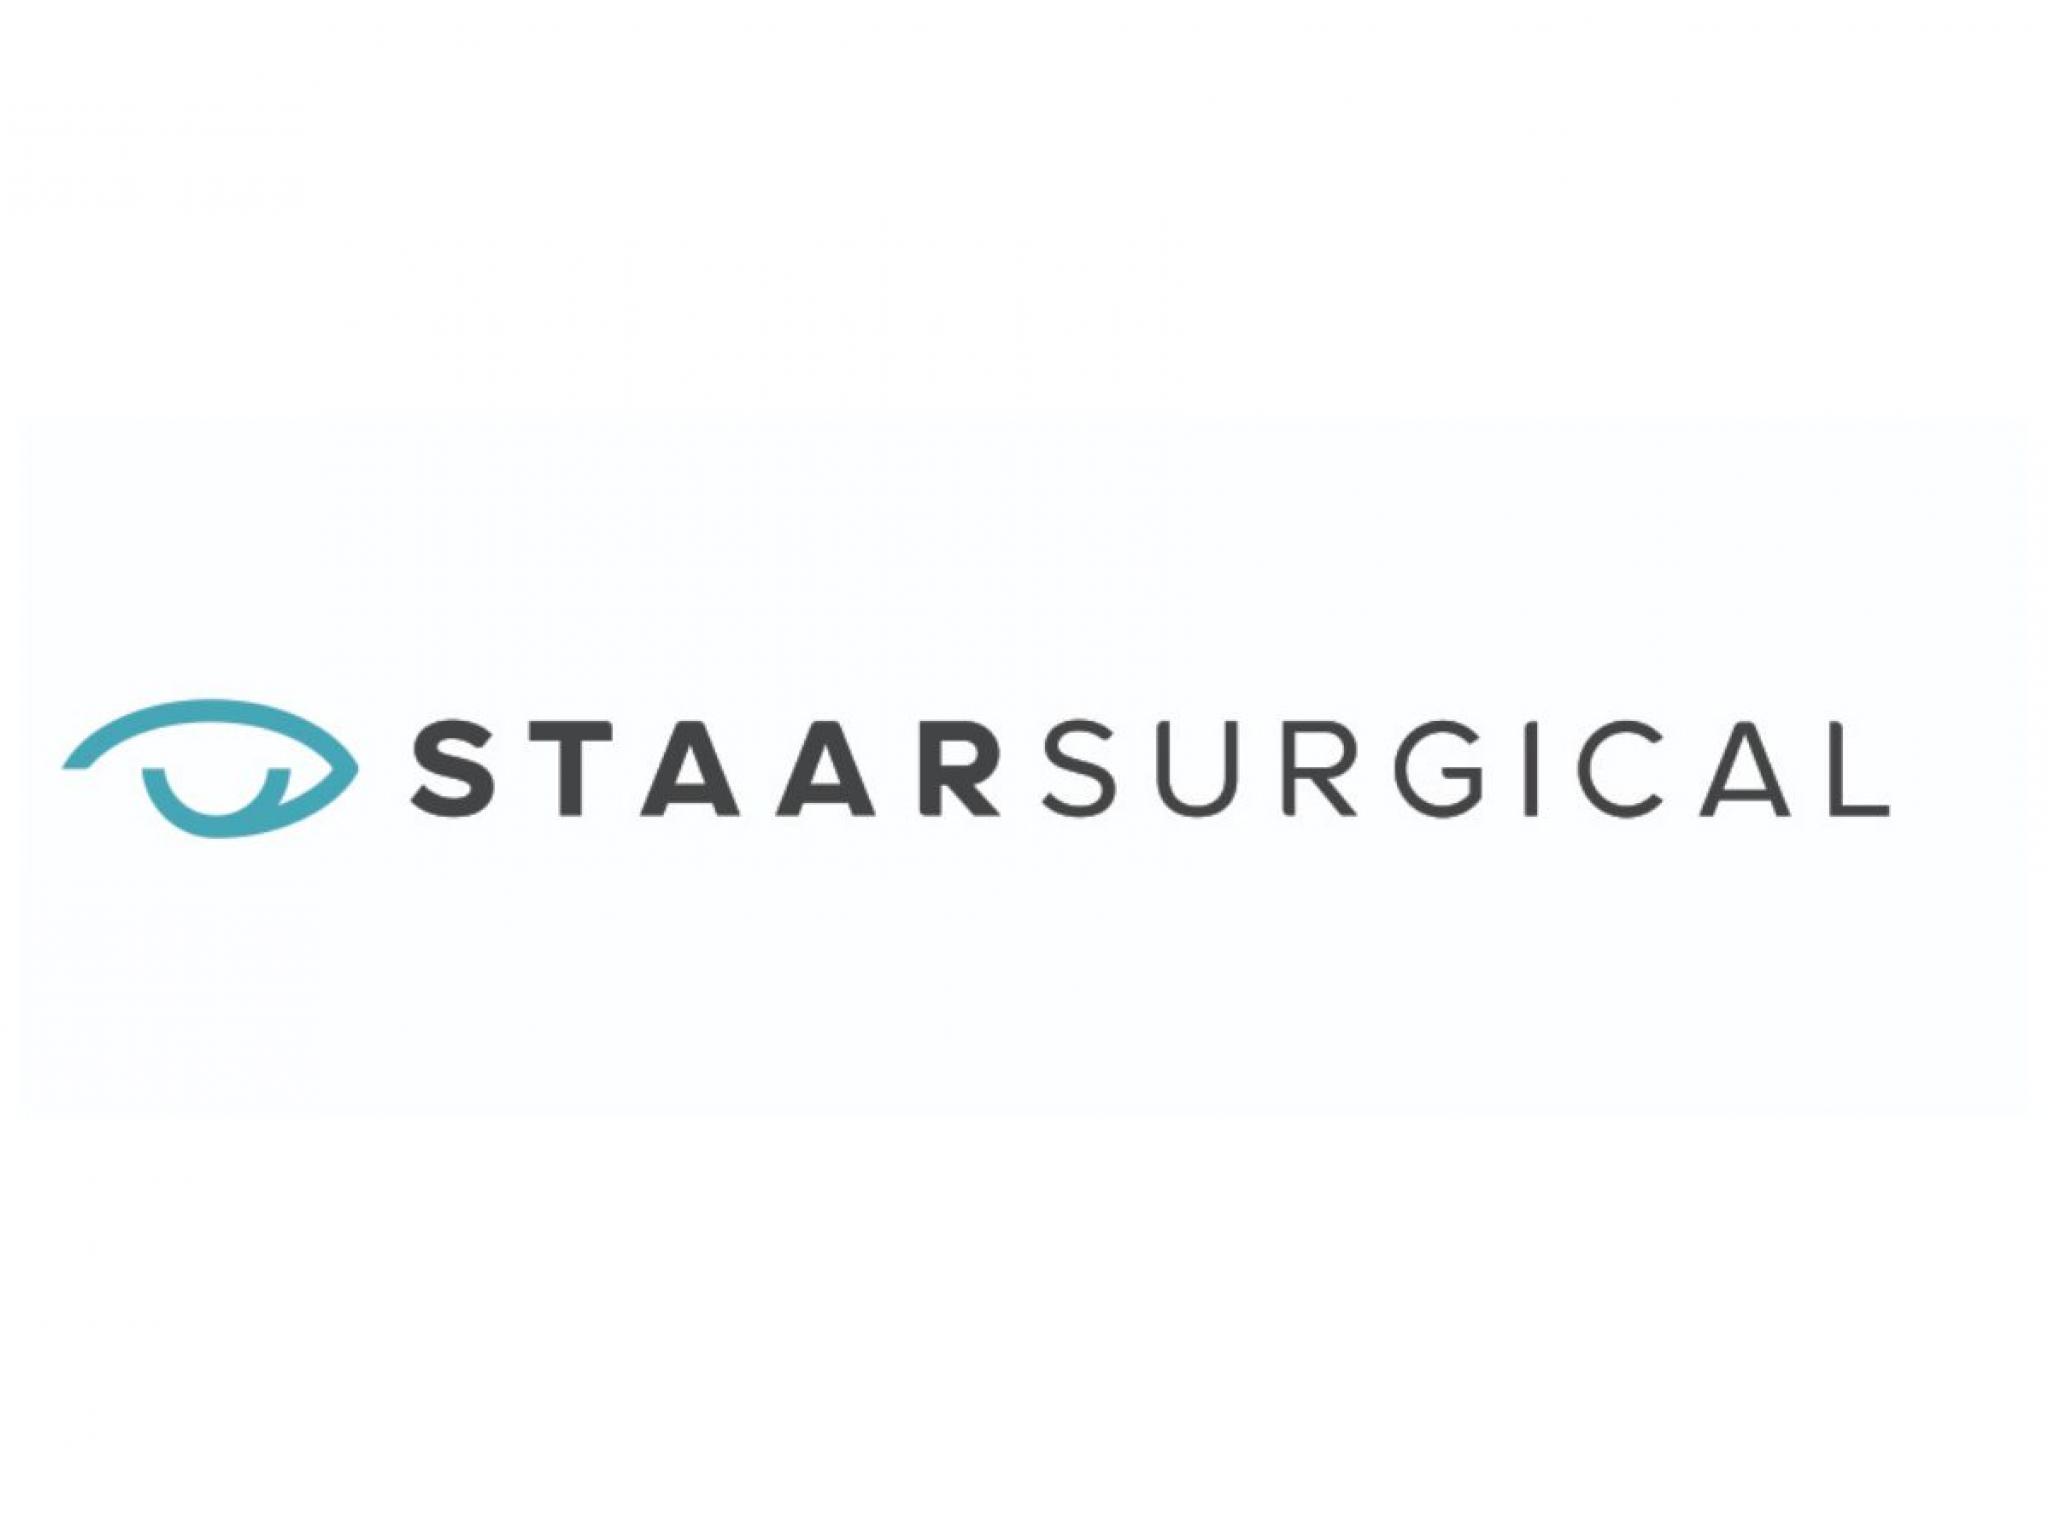  over-11m-bet-on-staar-surgical-check-out-these-3-stocks-insiders-are-buying 